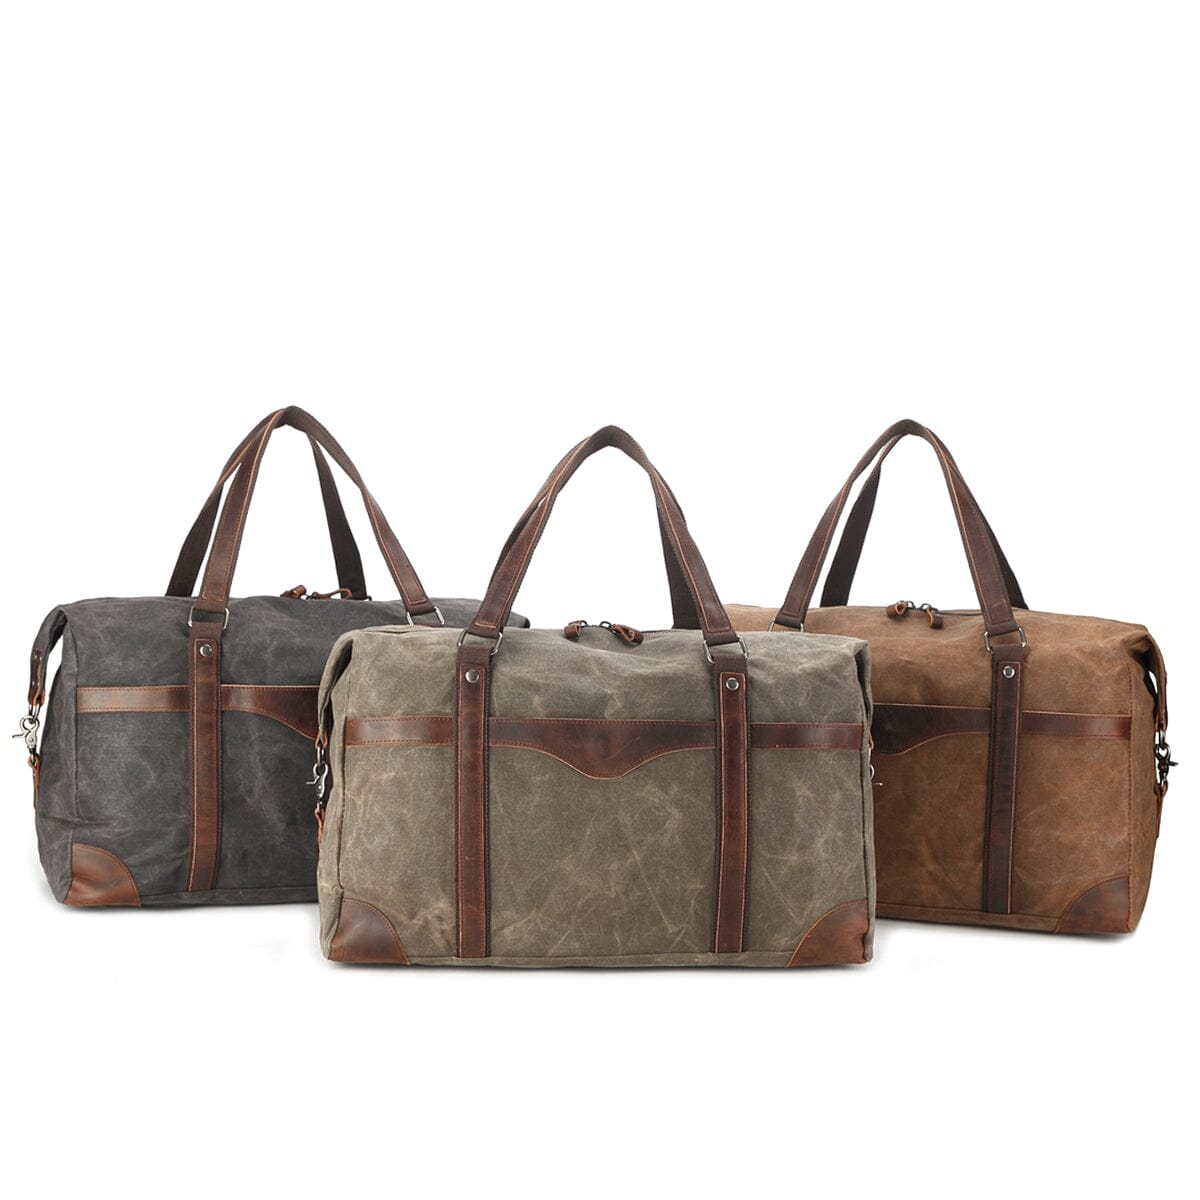 duffle bags different colors grey army green coffee